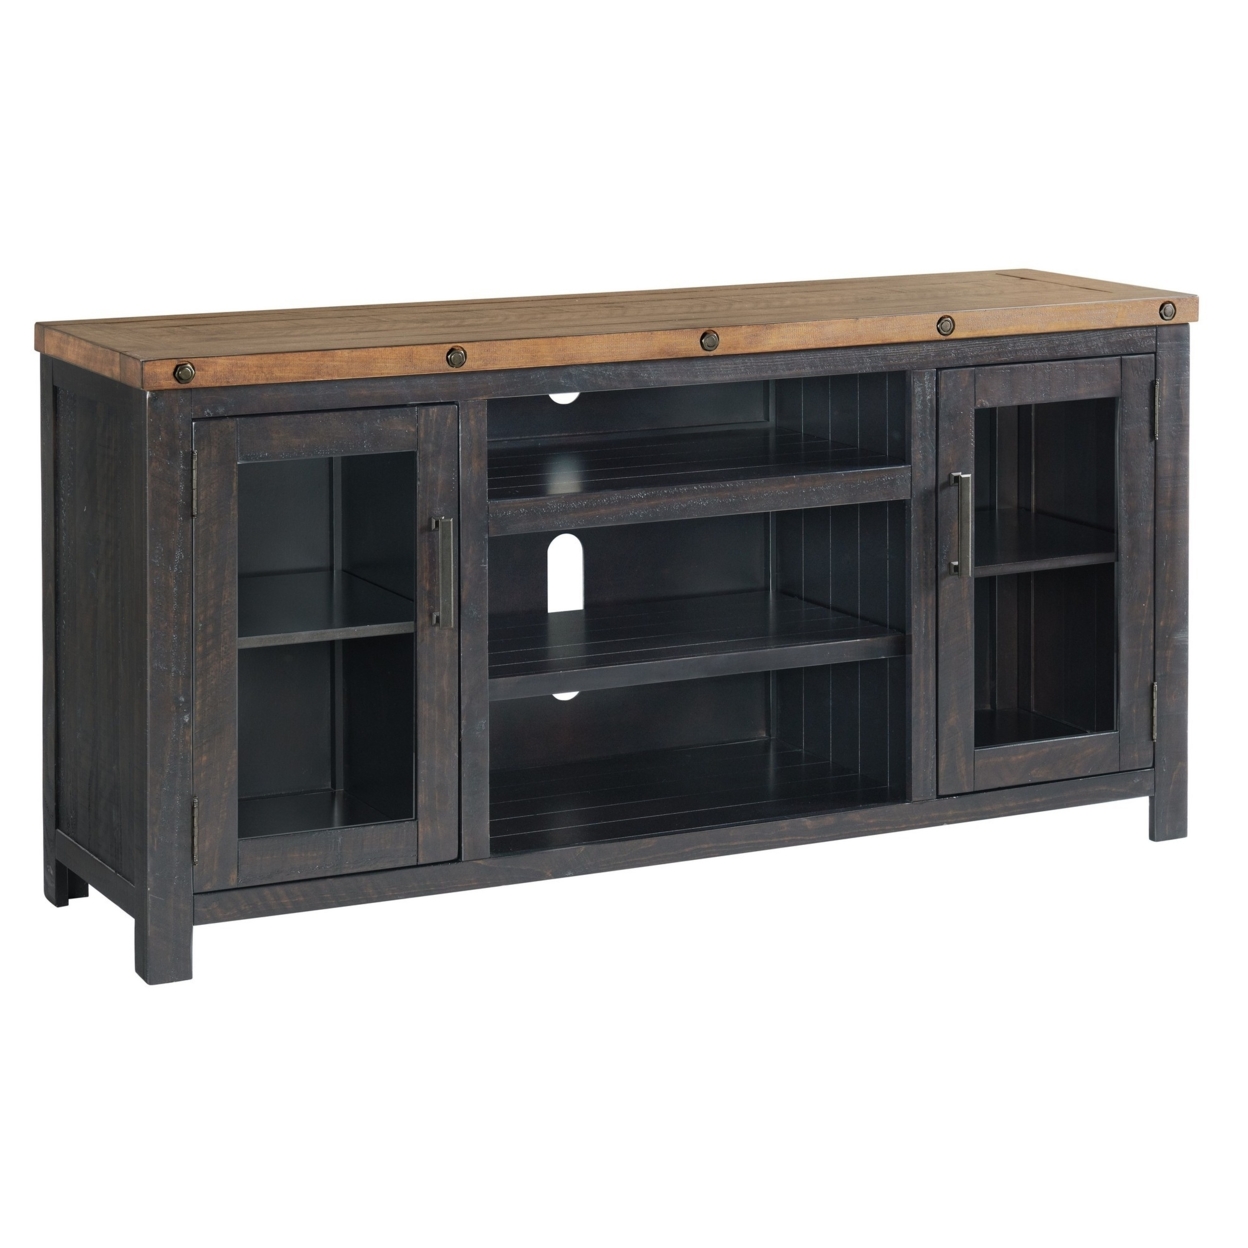 TV Stand With 2 Doors And Open Cubbies, Brown And Black- Saltoro Sherpi